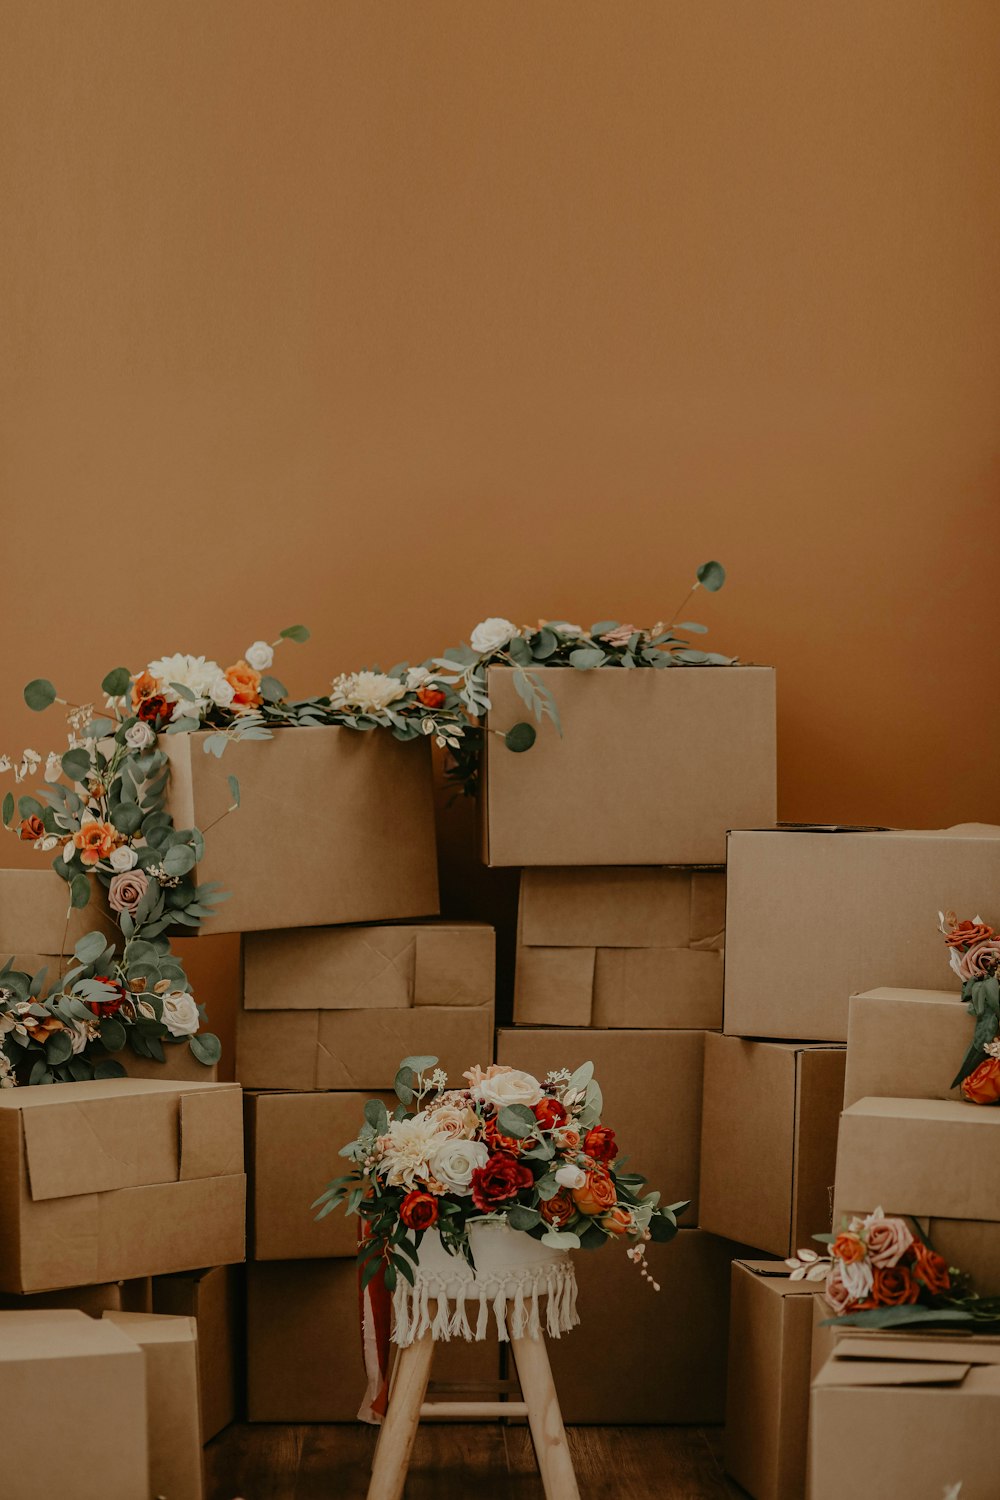 white and red flowers on brown cardboard boxes